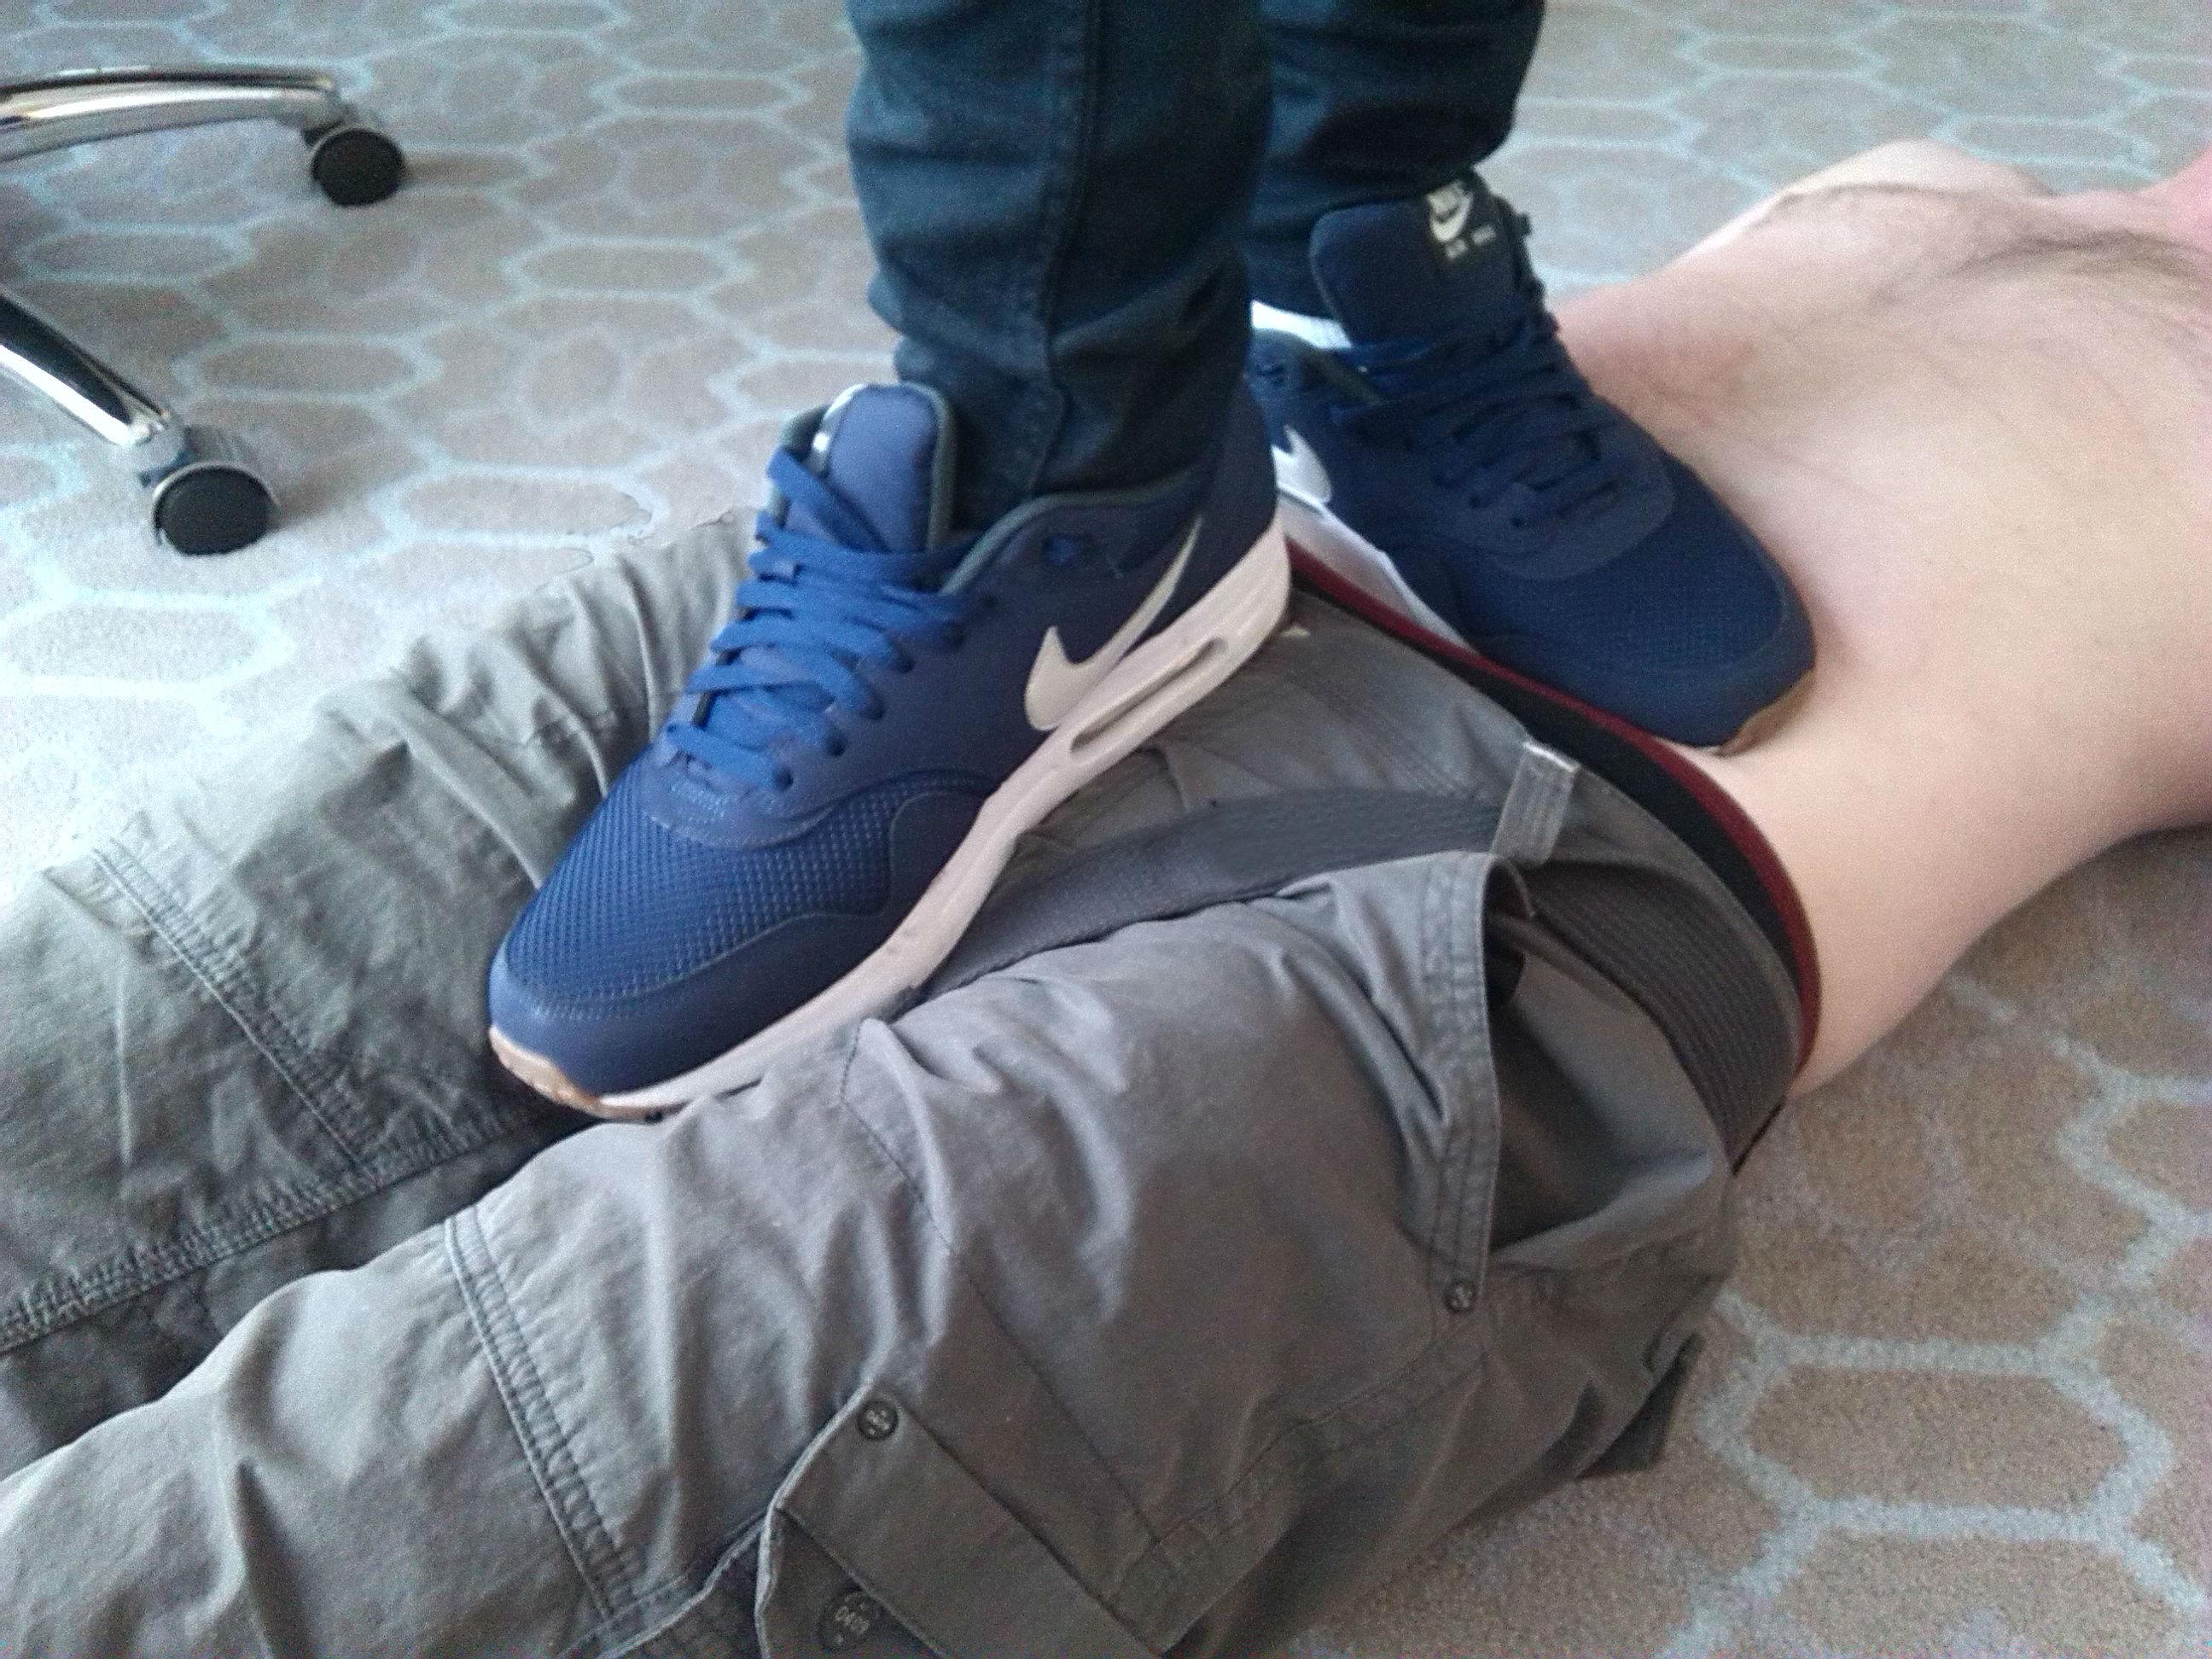 Volverse tallarines Todopoderoso FootwearFetish on Twitter: "I get trampled by @2guystrampling under their  Nike Air Max 1 trainers. More pics @ http://t.co/wE35xkLtym #trampling  http://t.co/zjof9n1Tbp" / Twitter